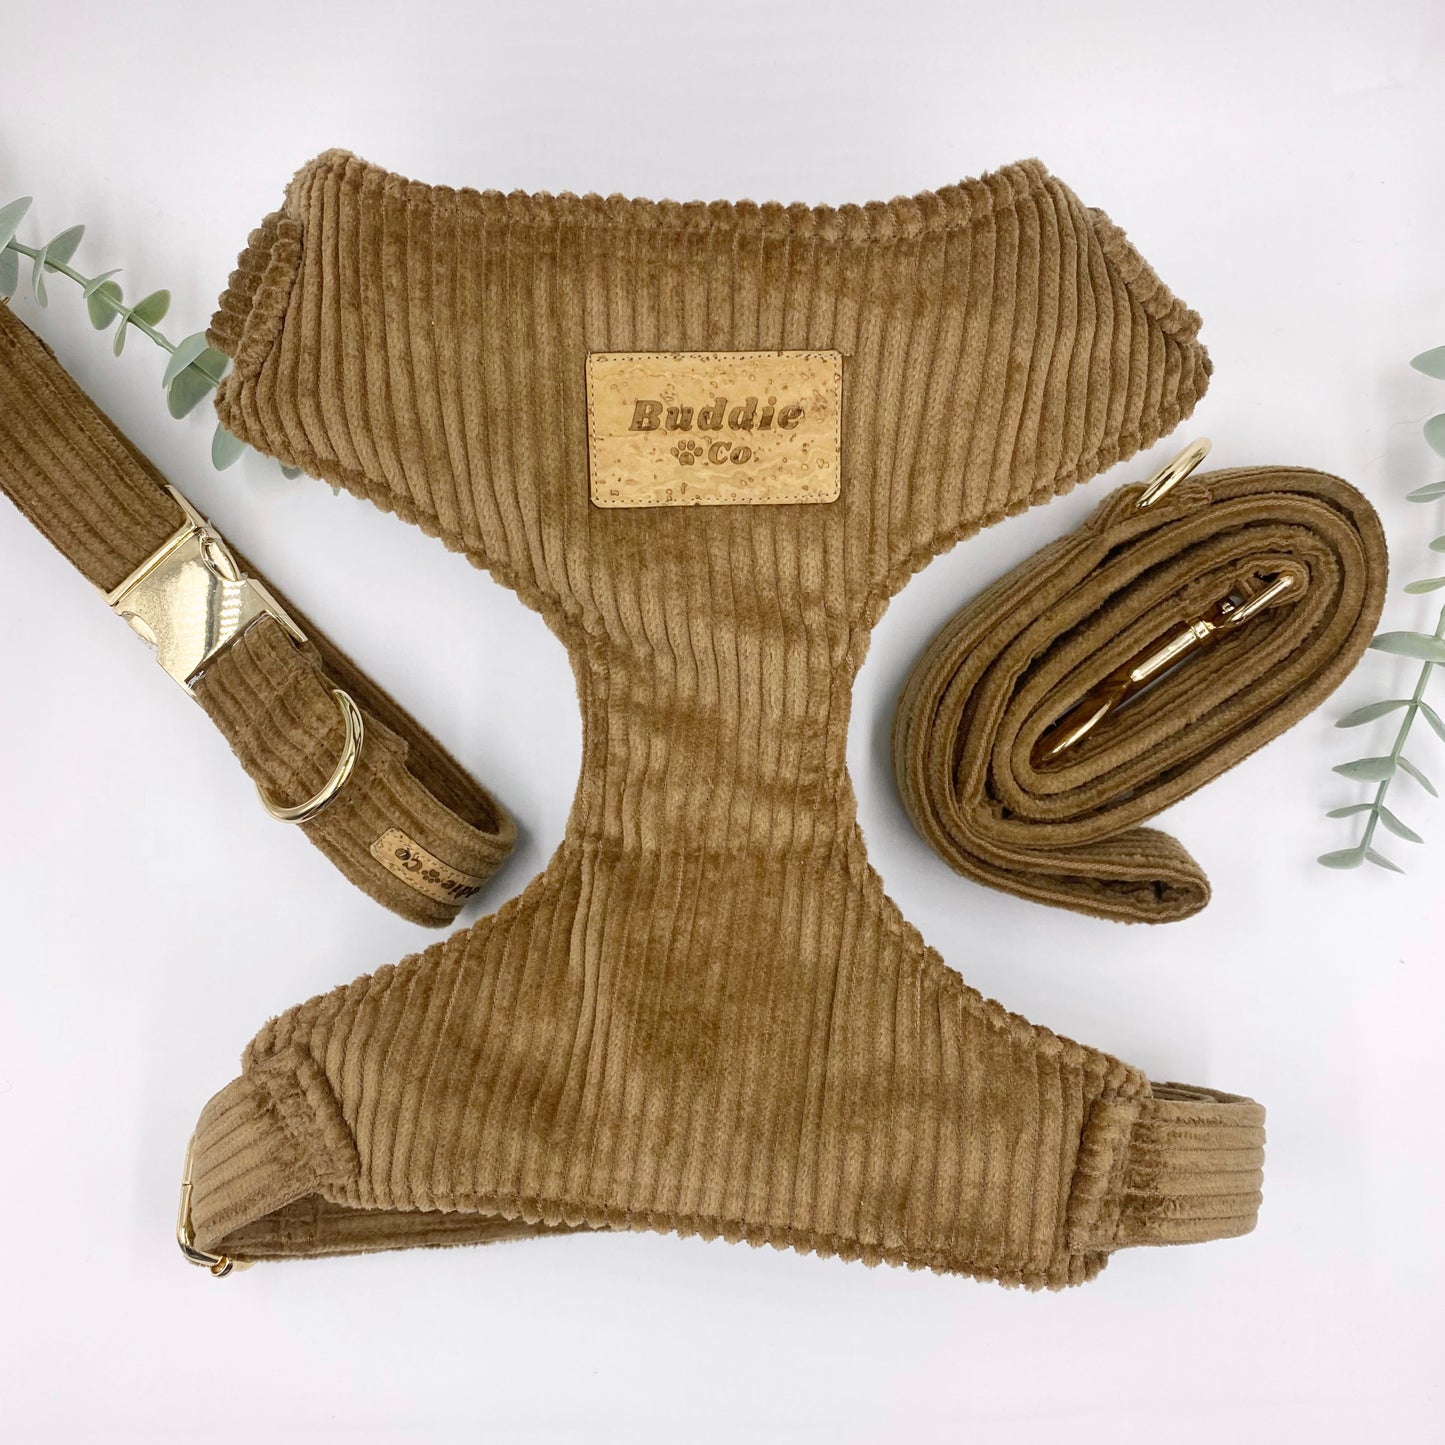 The 'Teddy' Chest Harness Bundle